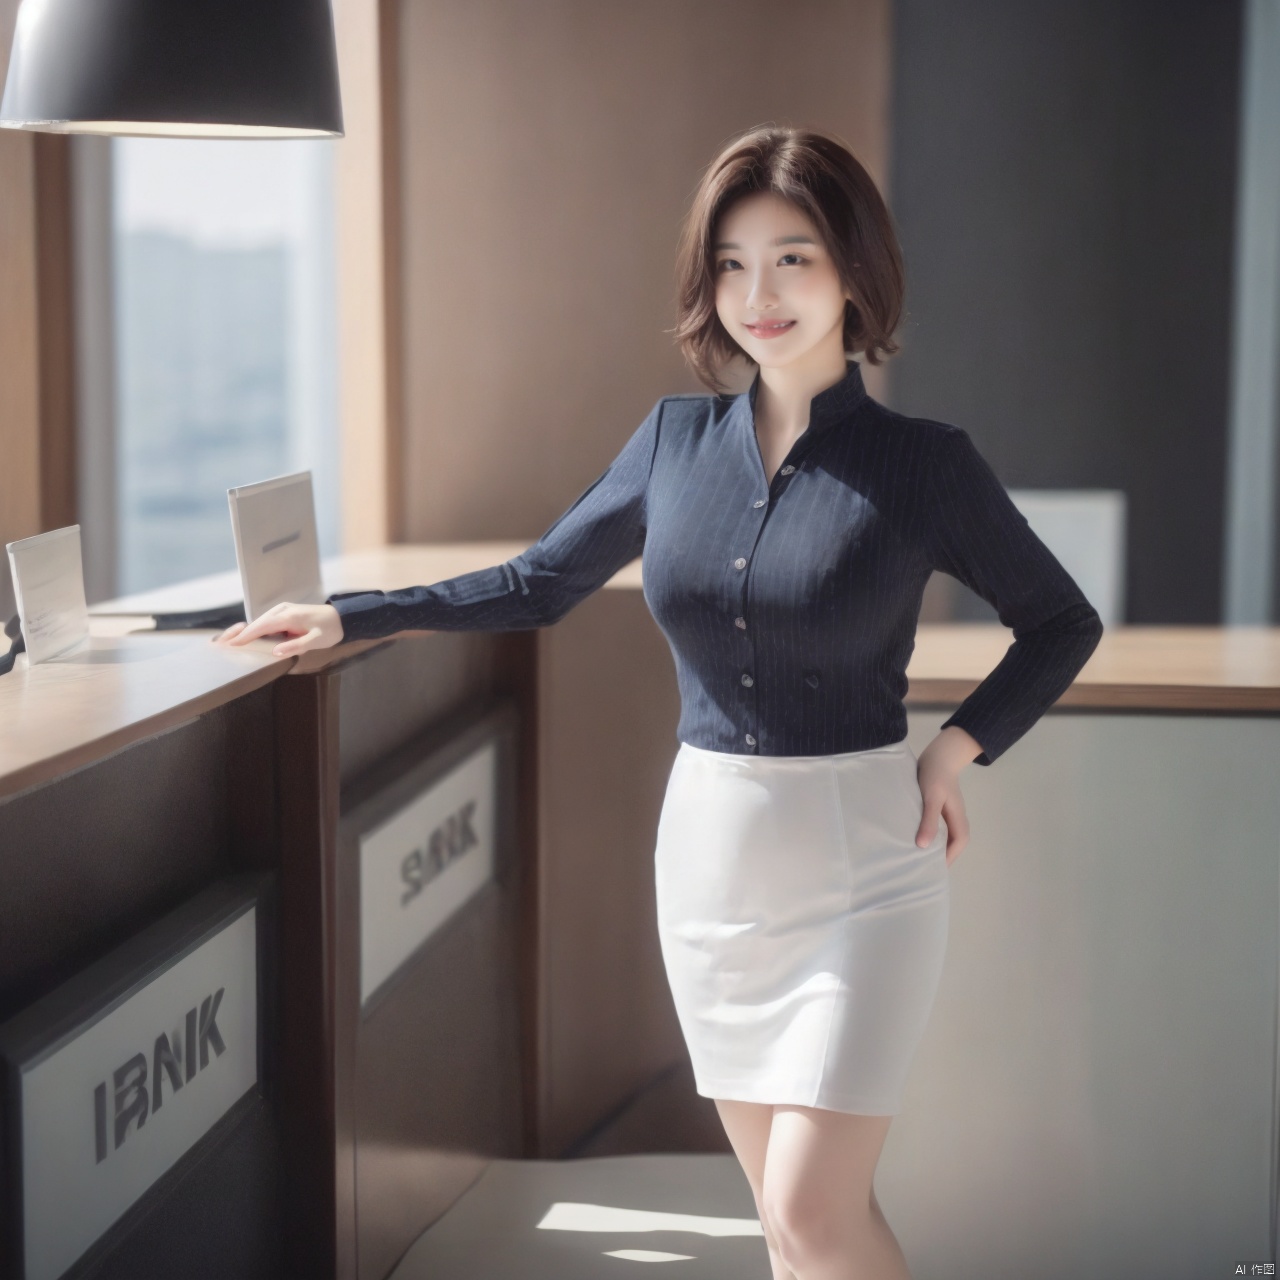  1 sexy girl,(short_hair=1.331),(standing in bank front desk=1.3),full_body,[master piece:1.2],best quality,extremely detailed CG,perfect lighting,8k wallpaper,photograph,3D,(silly_smile),(black_hair),nsfw,(wear bank uniform=1.3)
